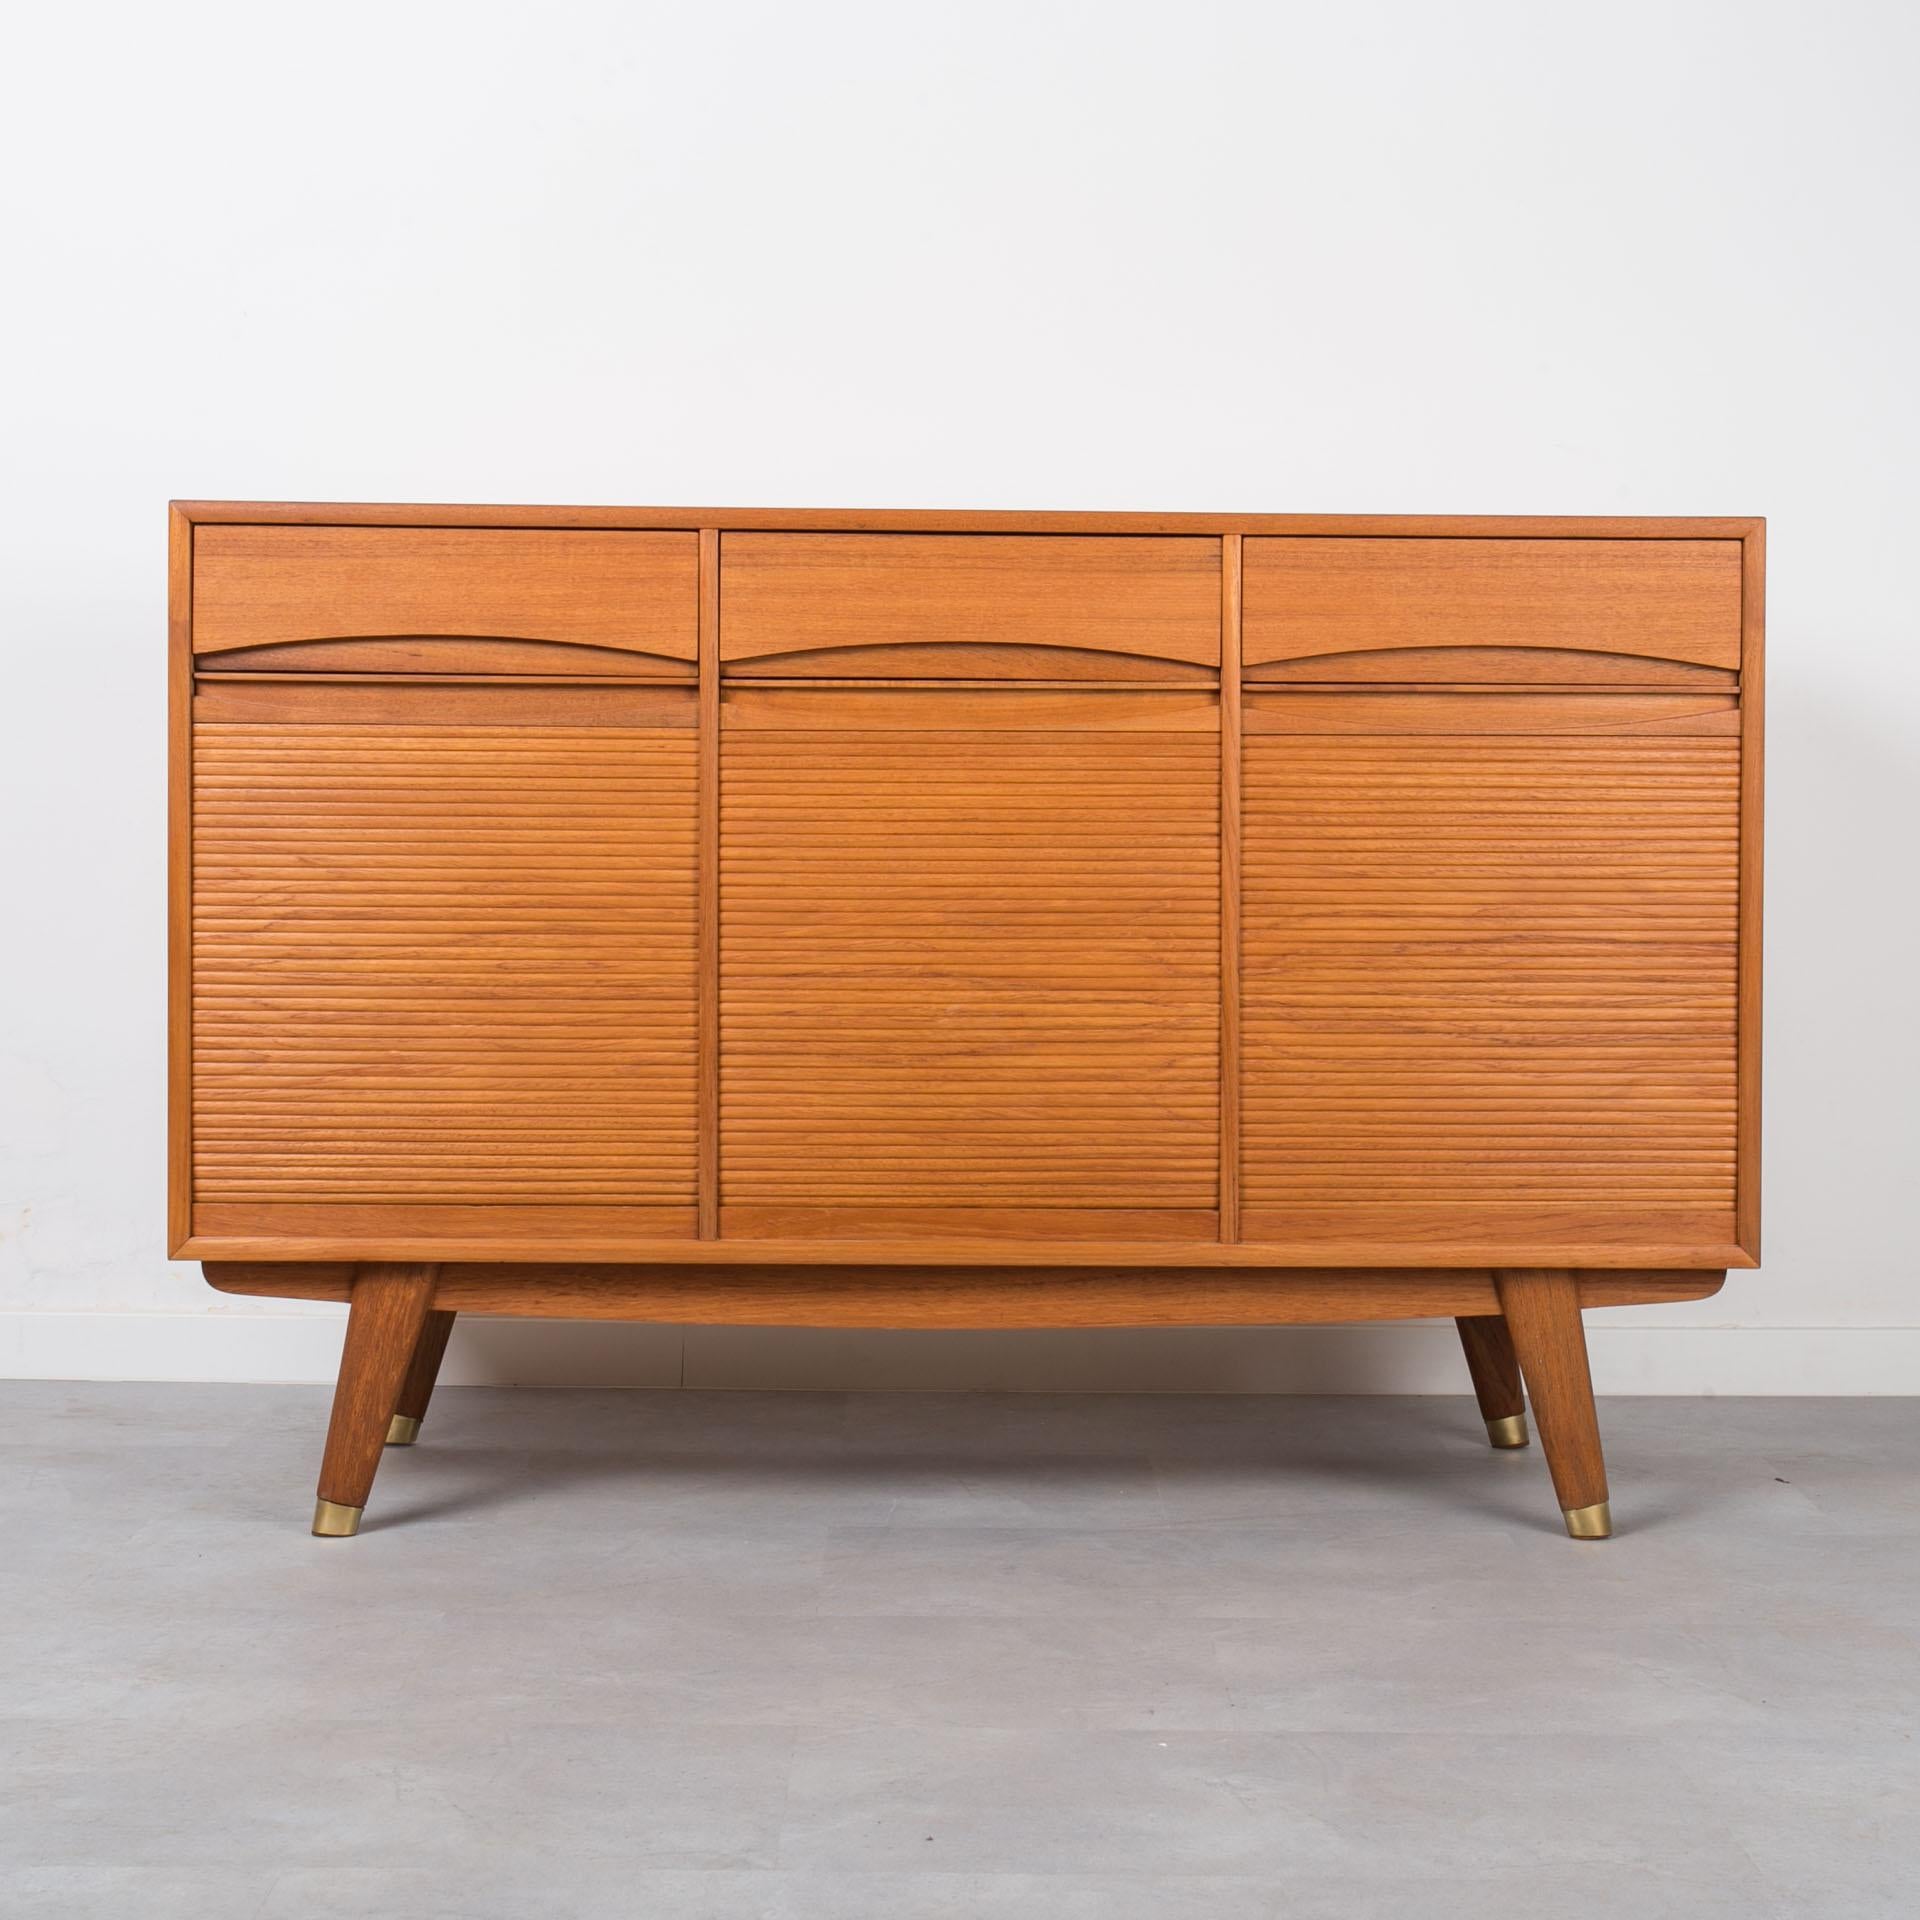 This teak sideboard comes from Norway and was made around 1960s. It features three storage sections, each one with tambour doors rolling down to reveal the storage space. In the middle section you will find 4 practical drawers, while left and right